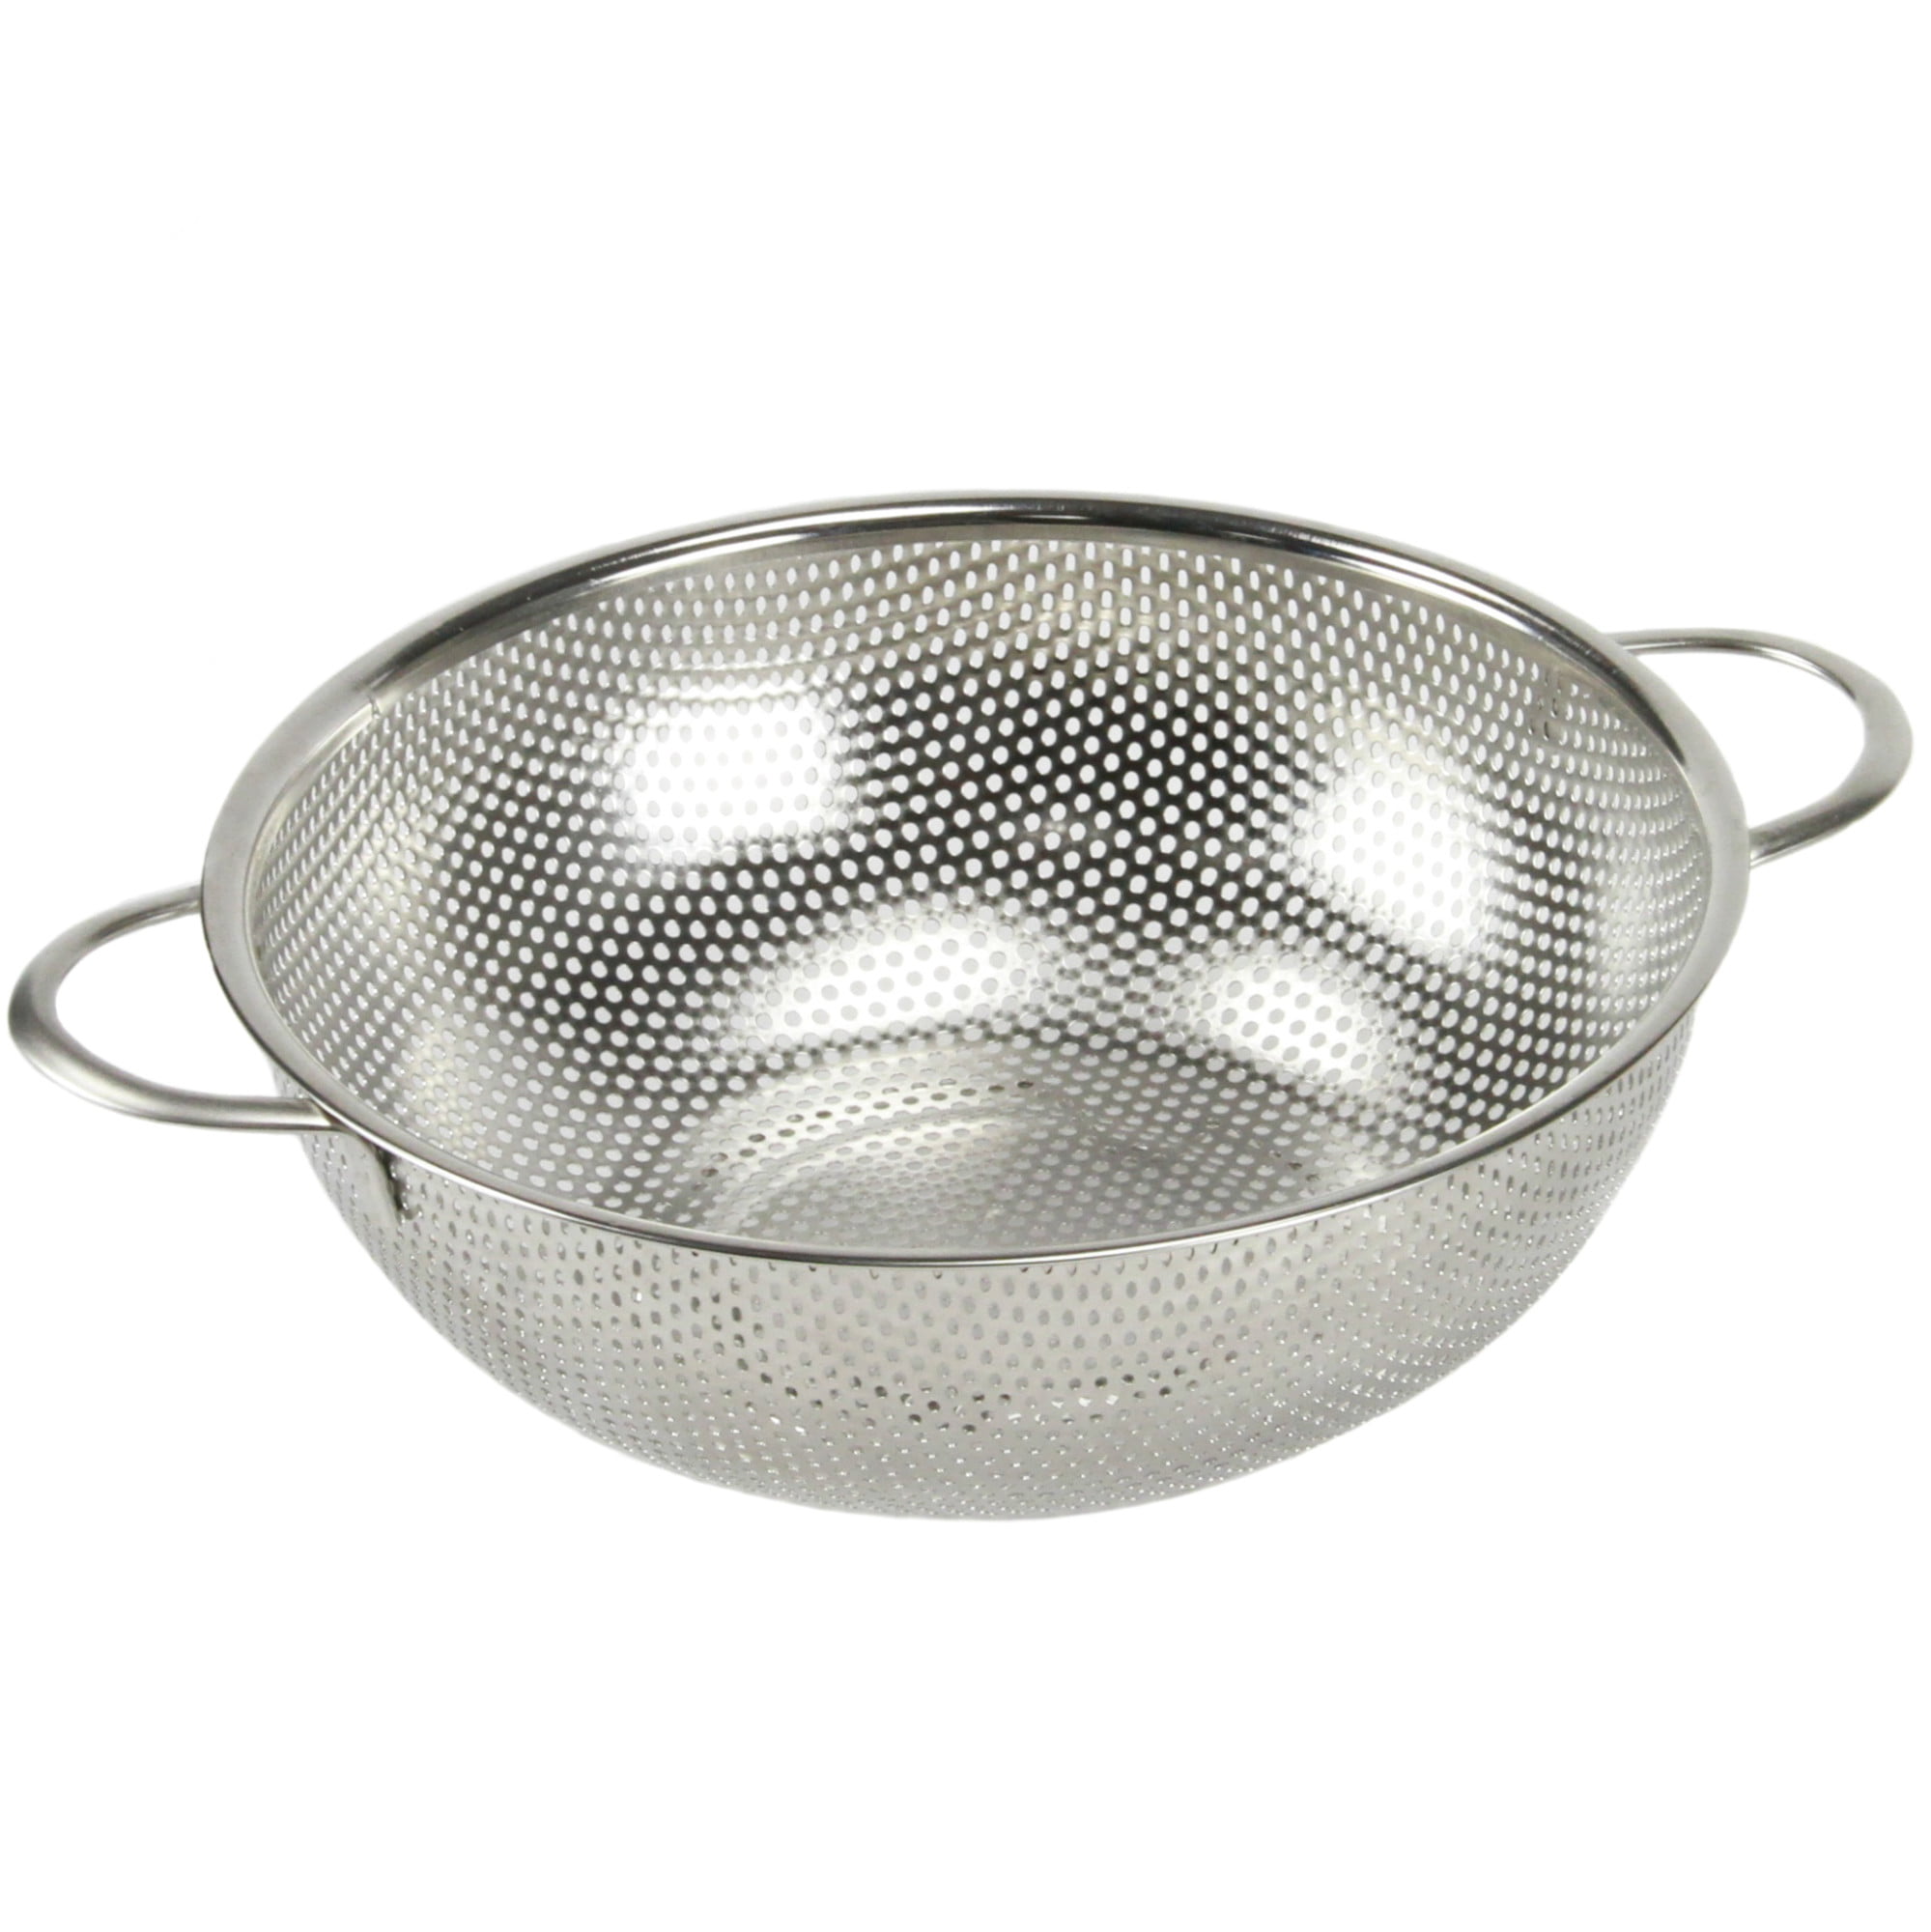 Picture of DDI 2288103 2.5 Quart Stainless Steel Colander Case of 36